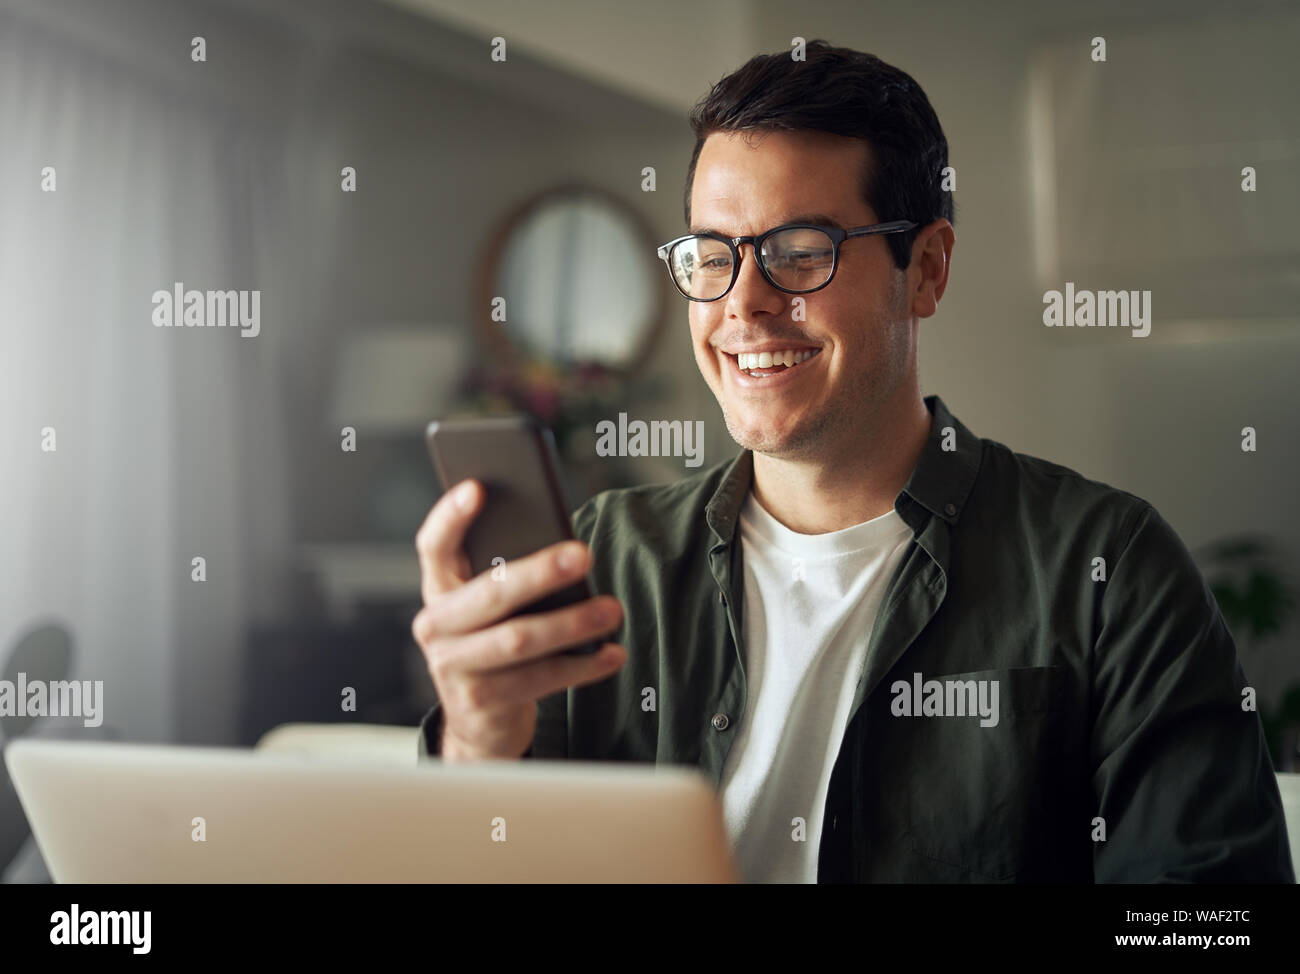 Man smiling while texting messages on mobile phone Stock Photo